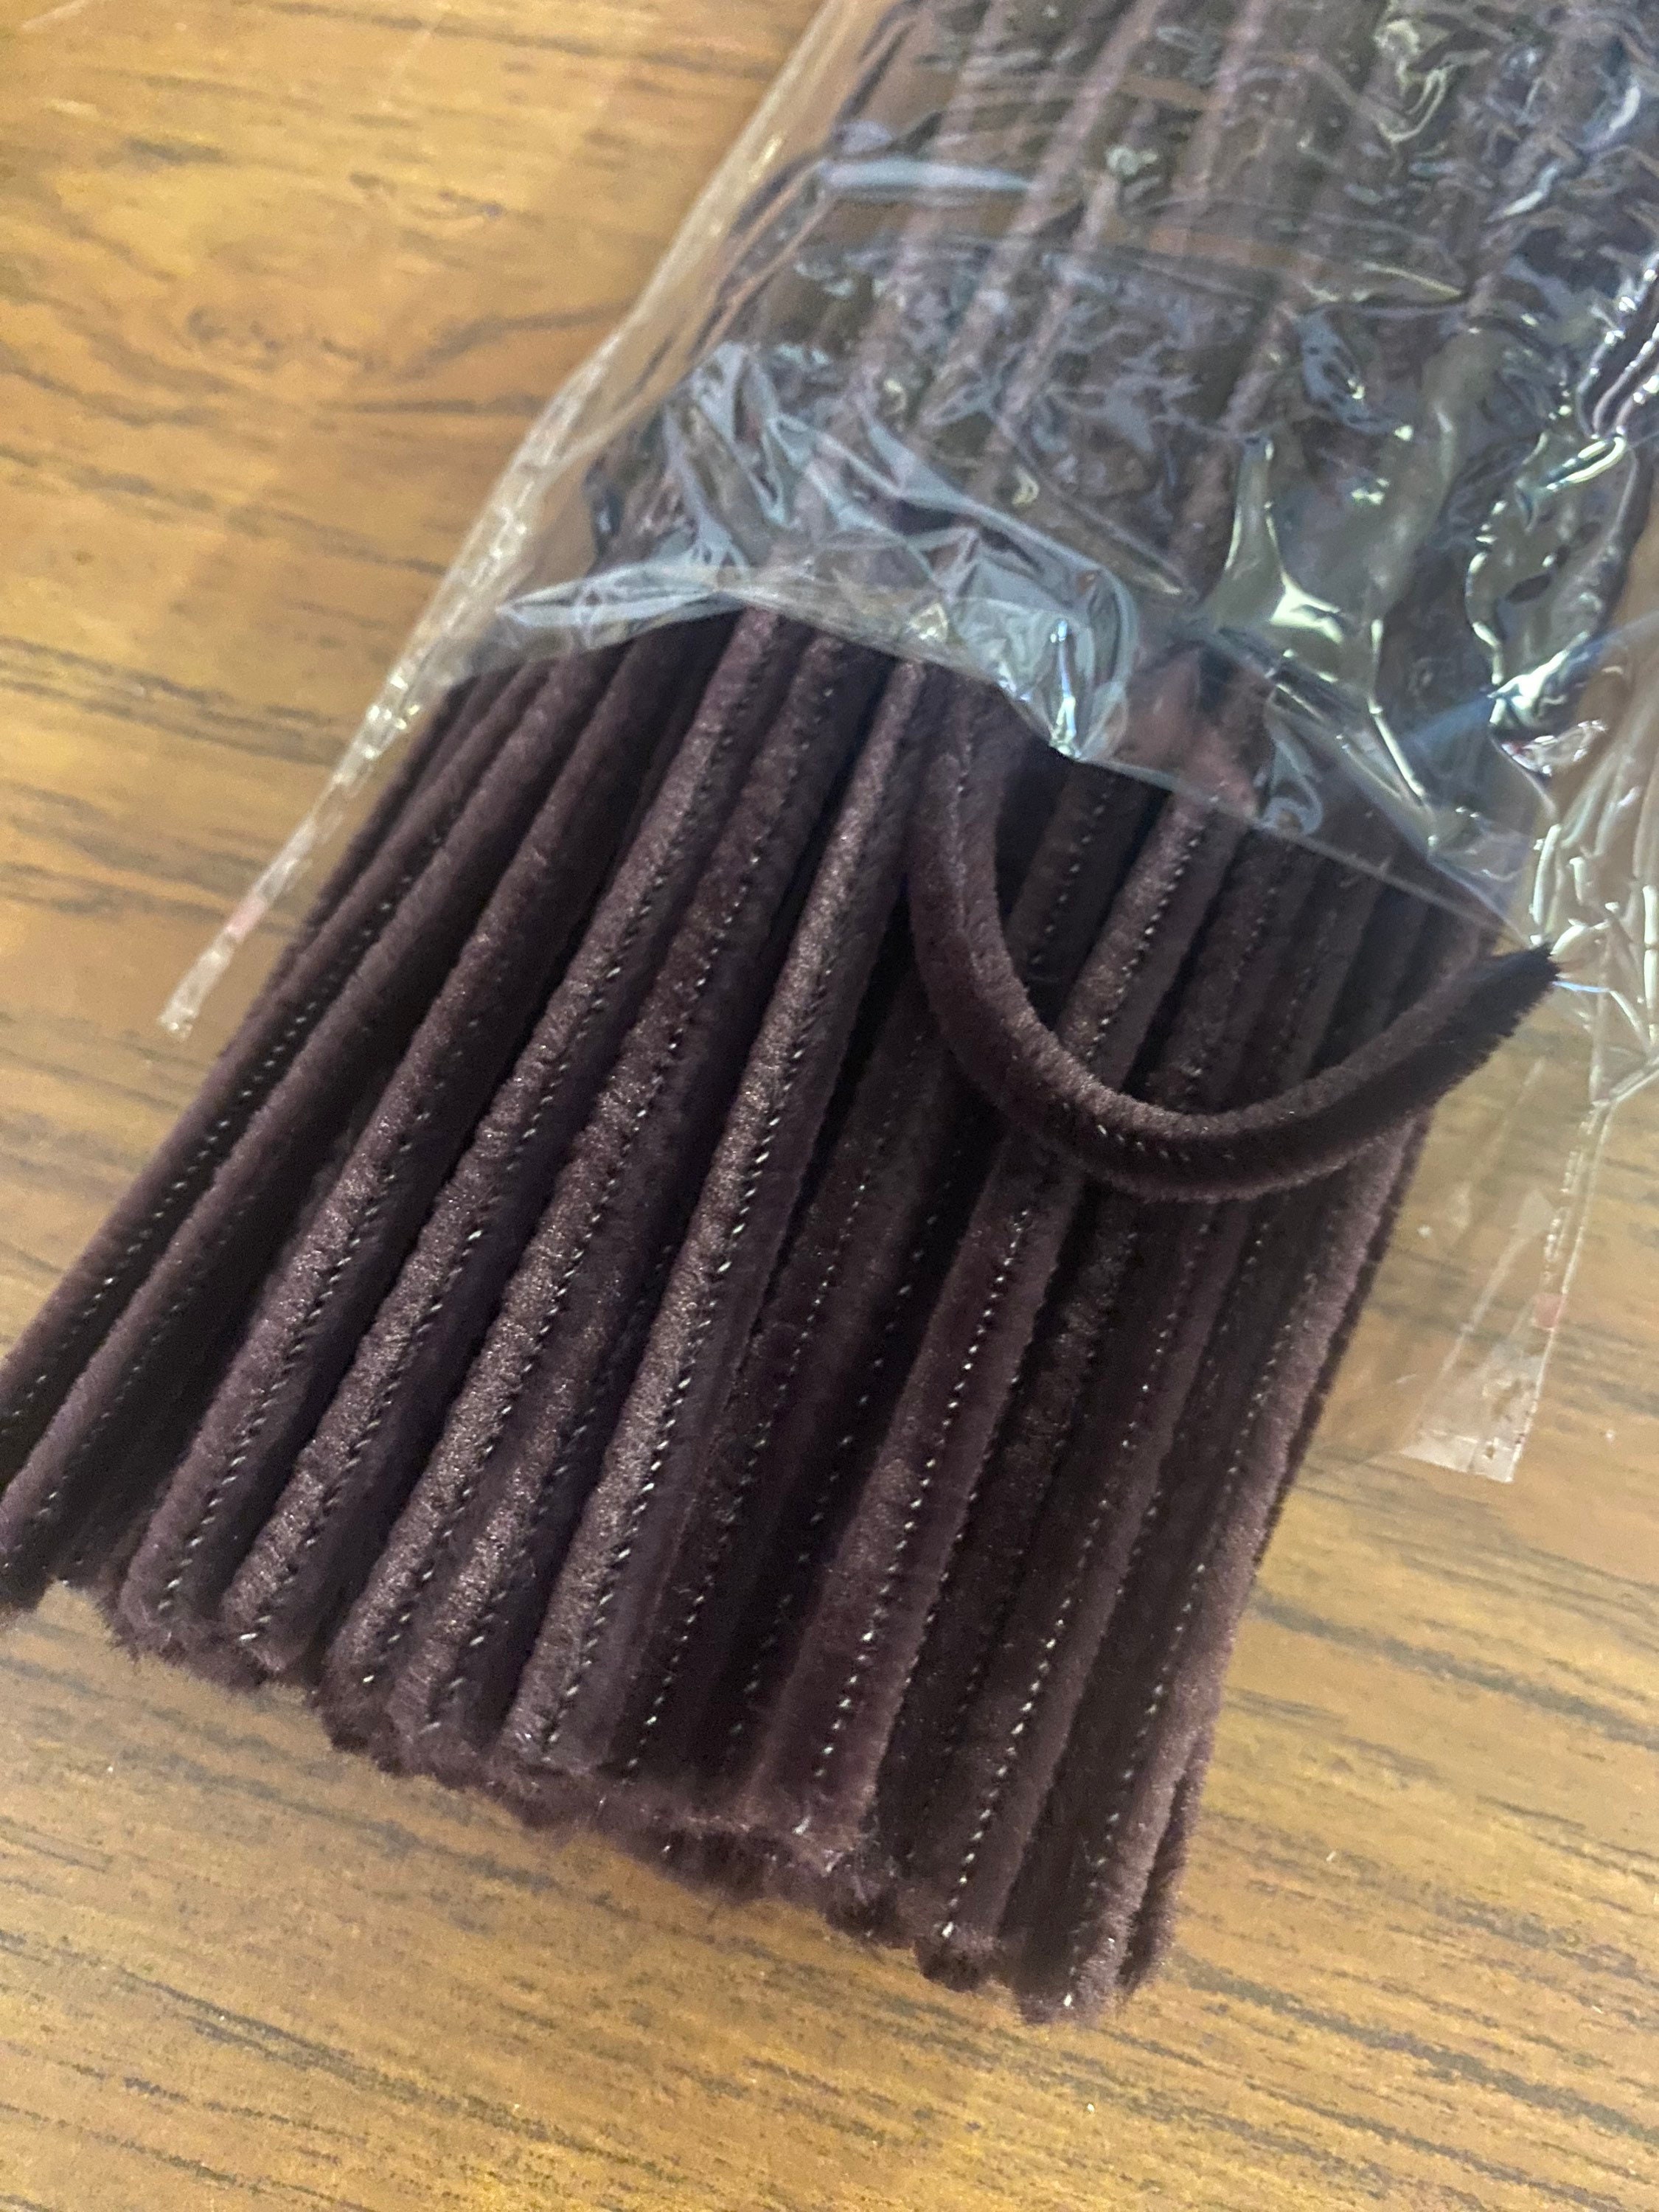 100 Black Pipe Cleaners 